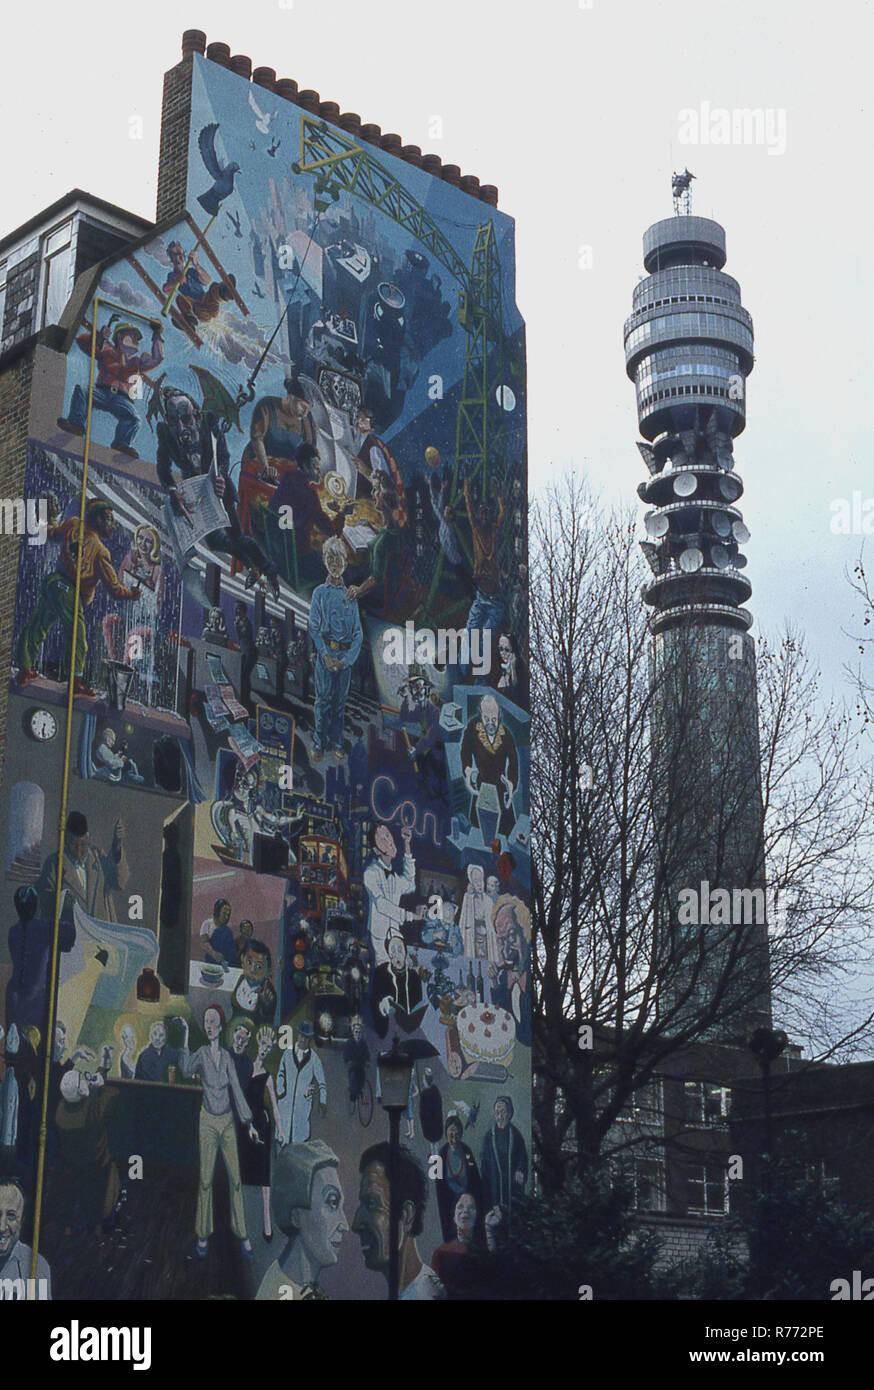 1970s, historical, a wall of a tall building with graffiti artwork on, seen next to the communication tower, the Post Office tower, London, England, UK. The tower was the tallest buidling in the UK from 1964 to 1980. Stock Photo